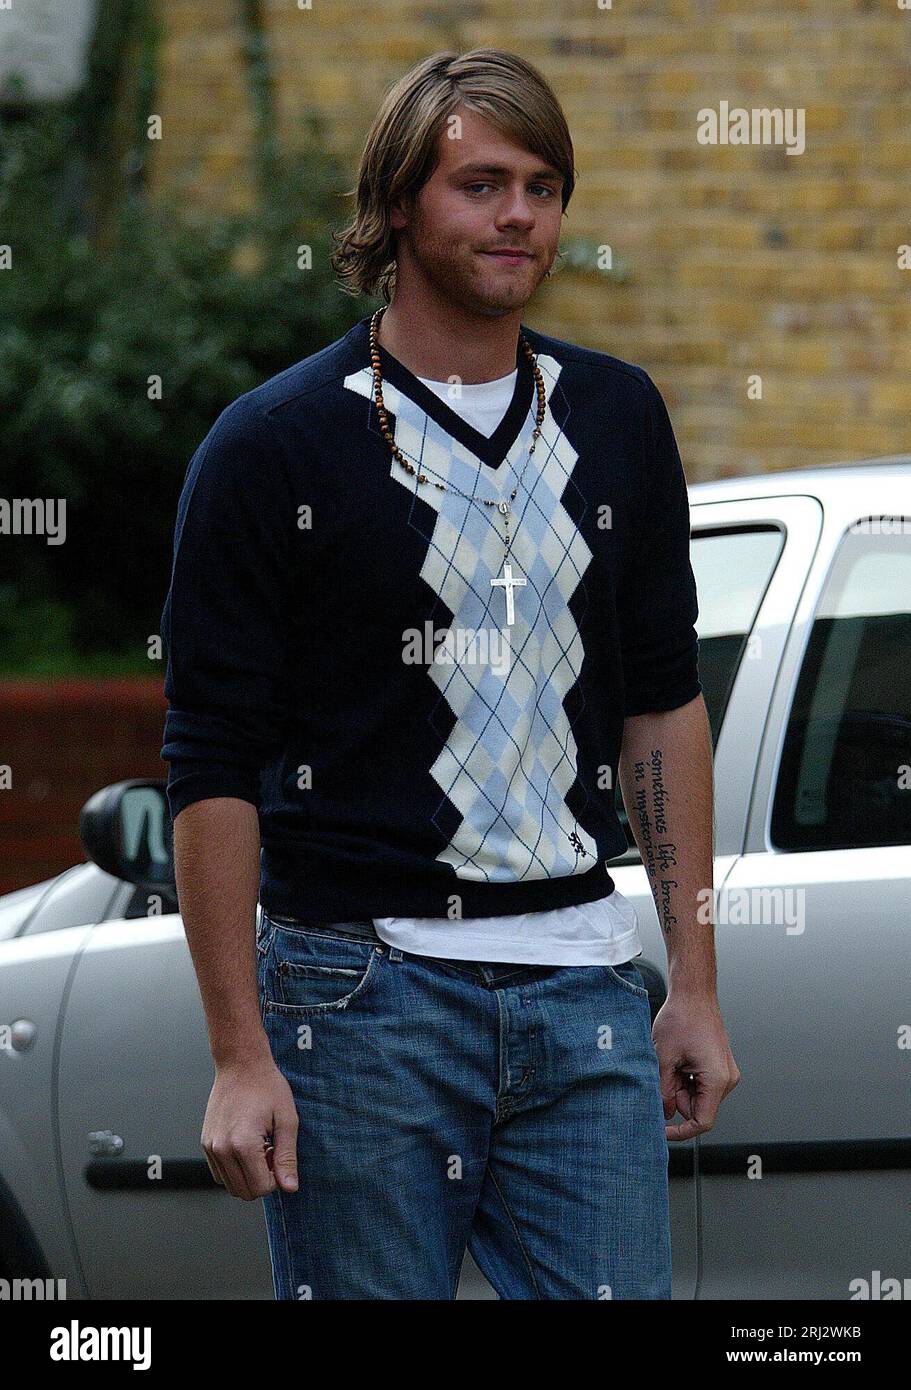 Brian Mcfadden's leaving Riverside Studios in Hammersmith, London after appearing on CD:TV. Picture James Boardman. Stock Photo